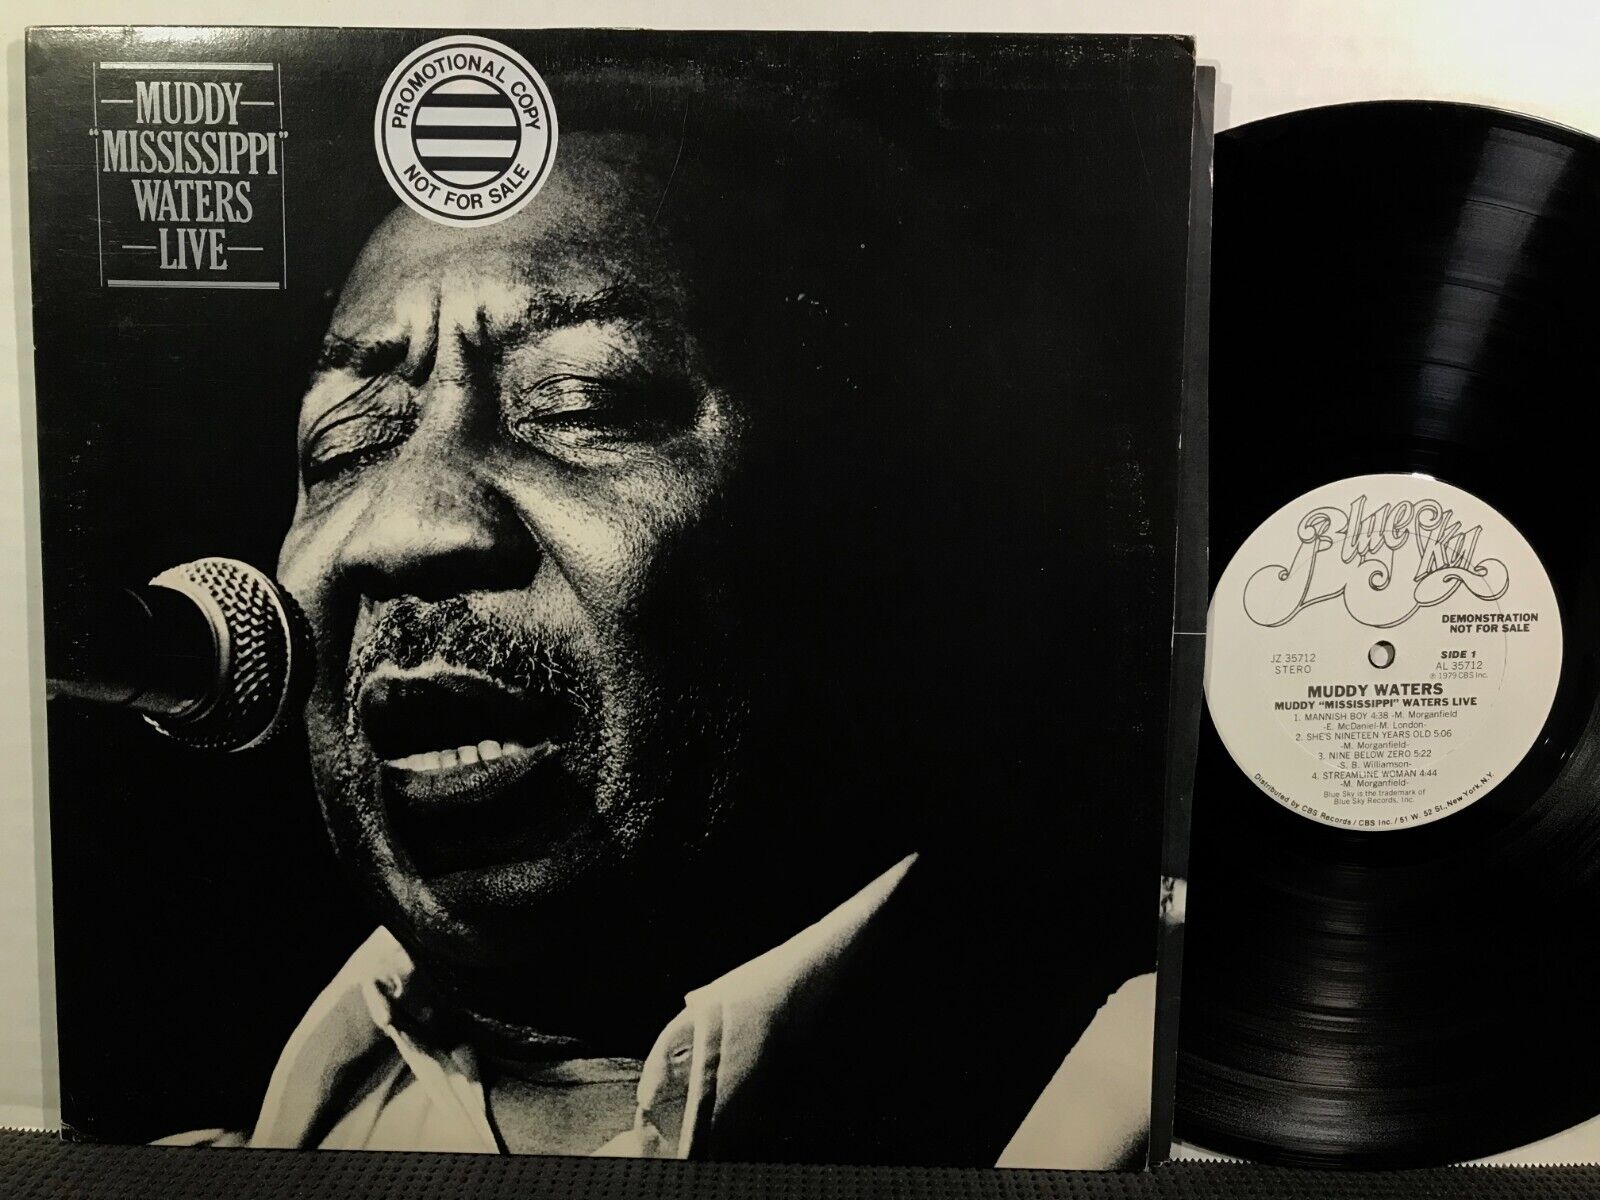 MUDDY WATERS Muddy Mississippi Waters Live LP BLUE SKY STEREO DJ PROMO 1979